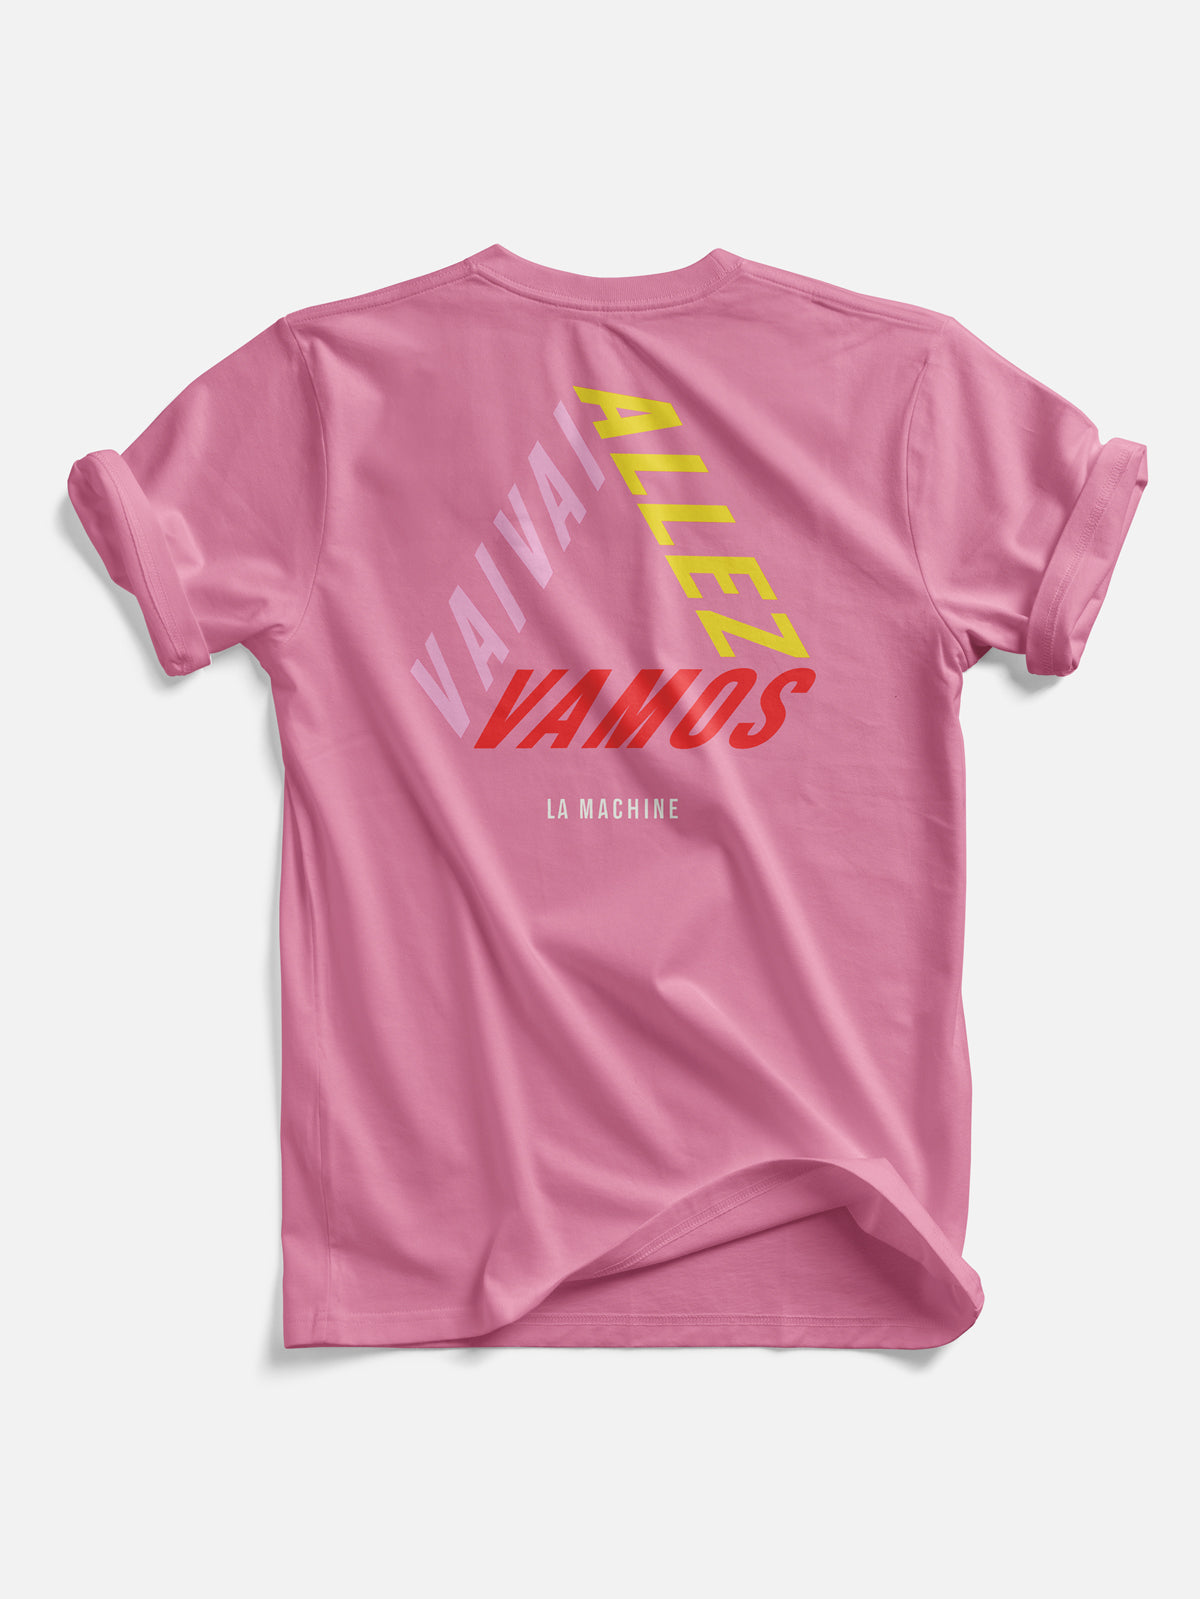 Vai Allez Vamos - Relaxed Fit - T-shirt